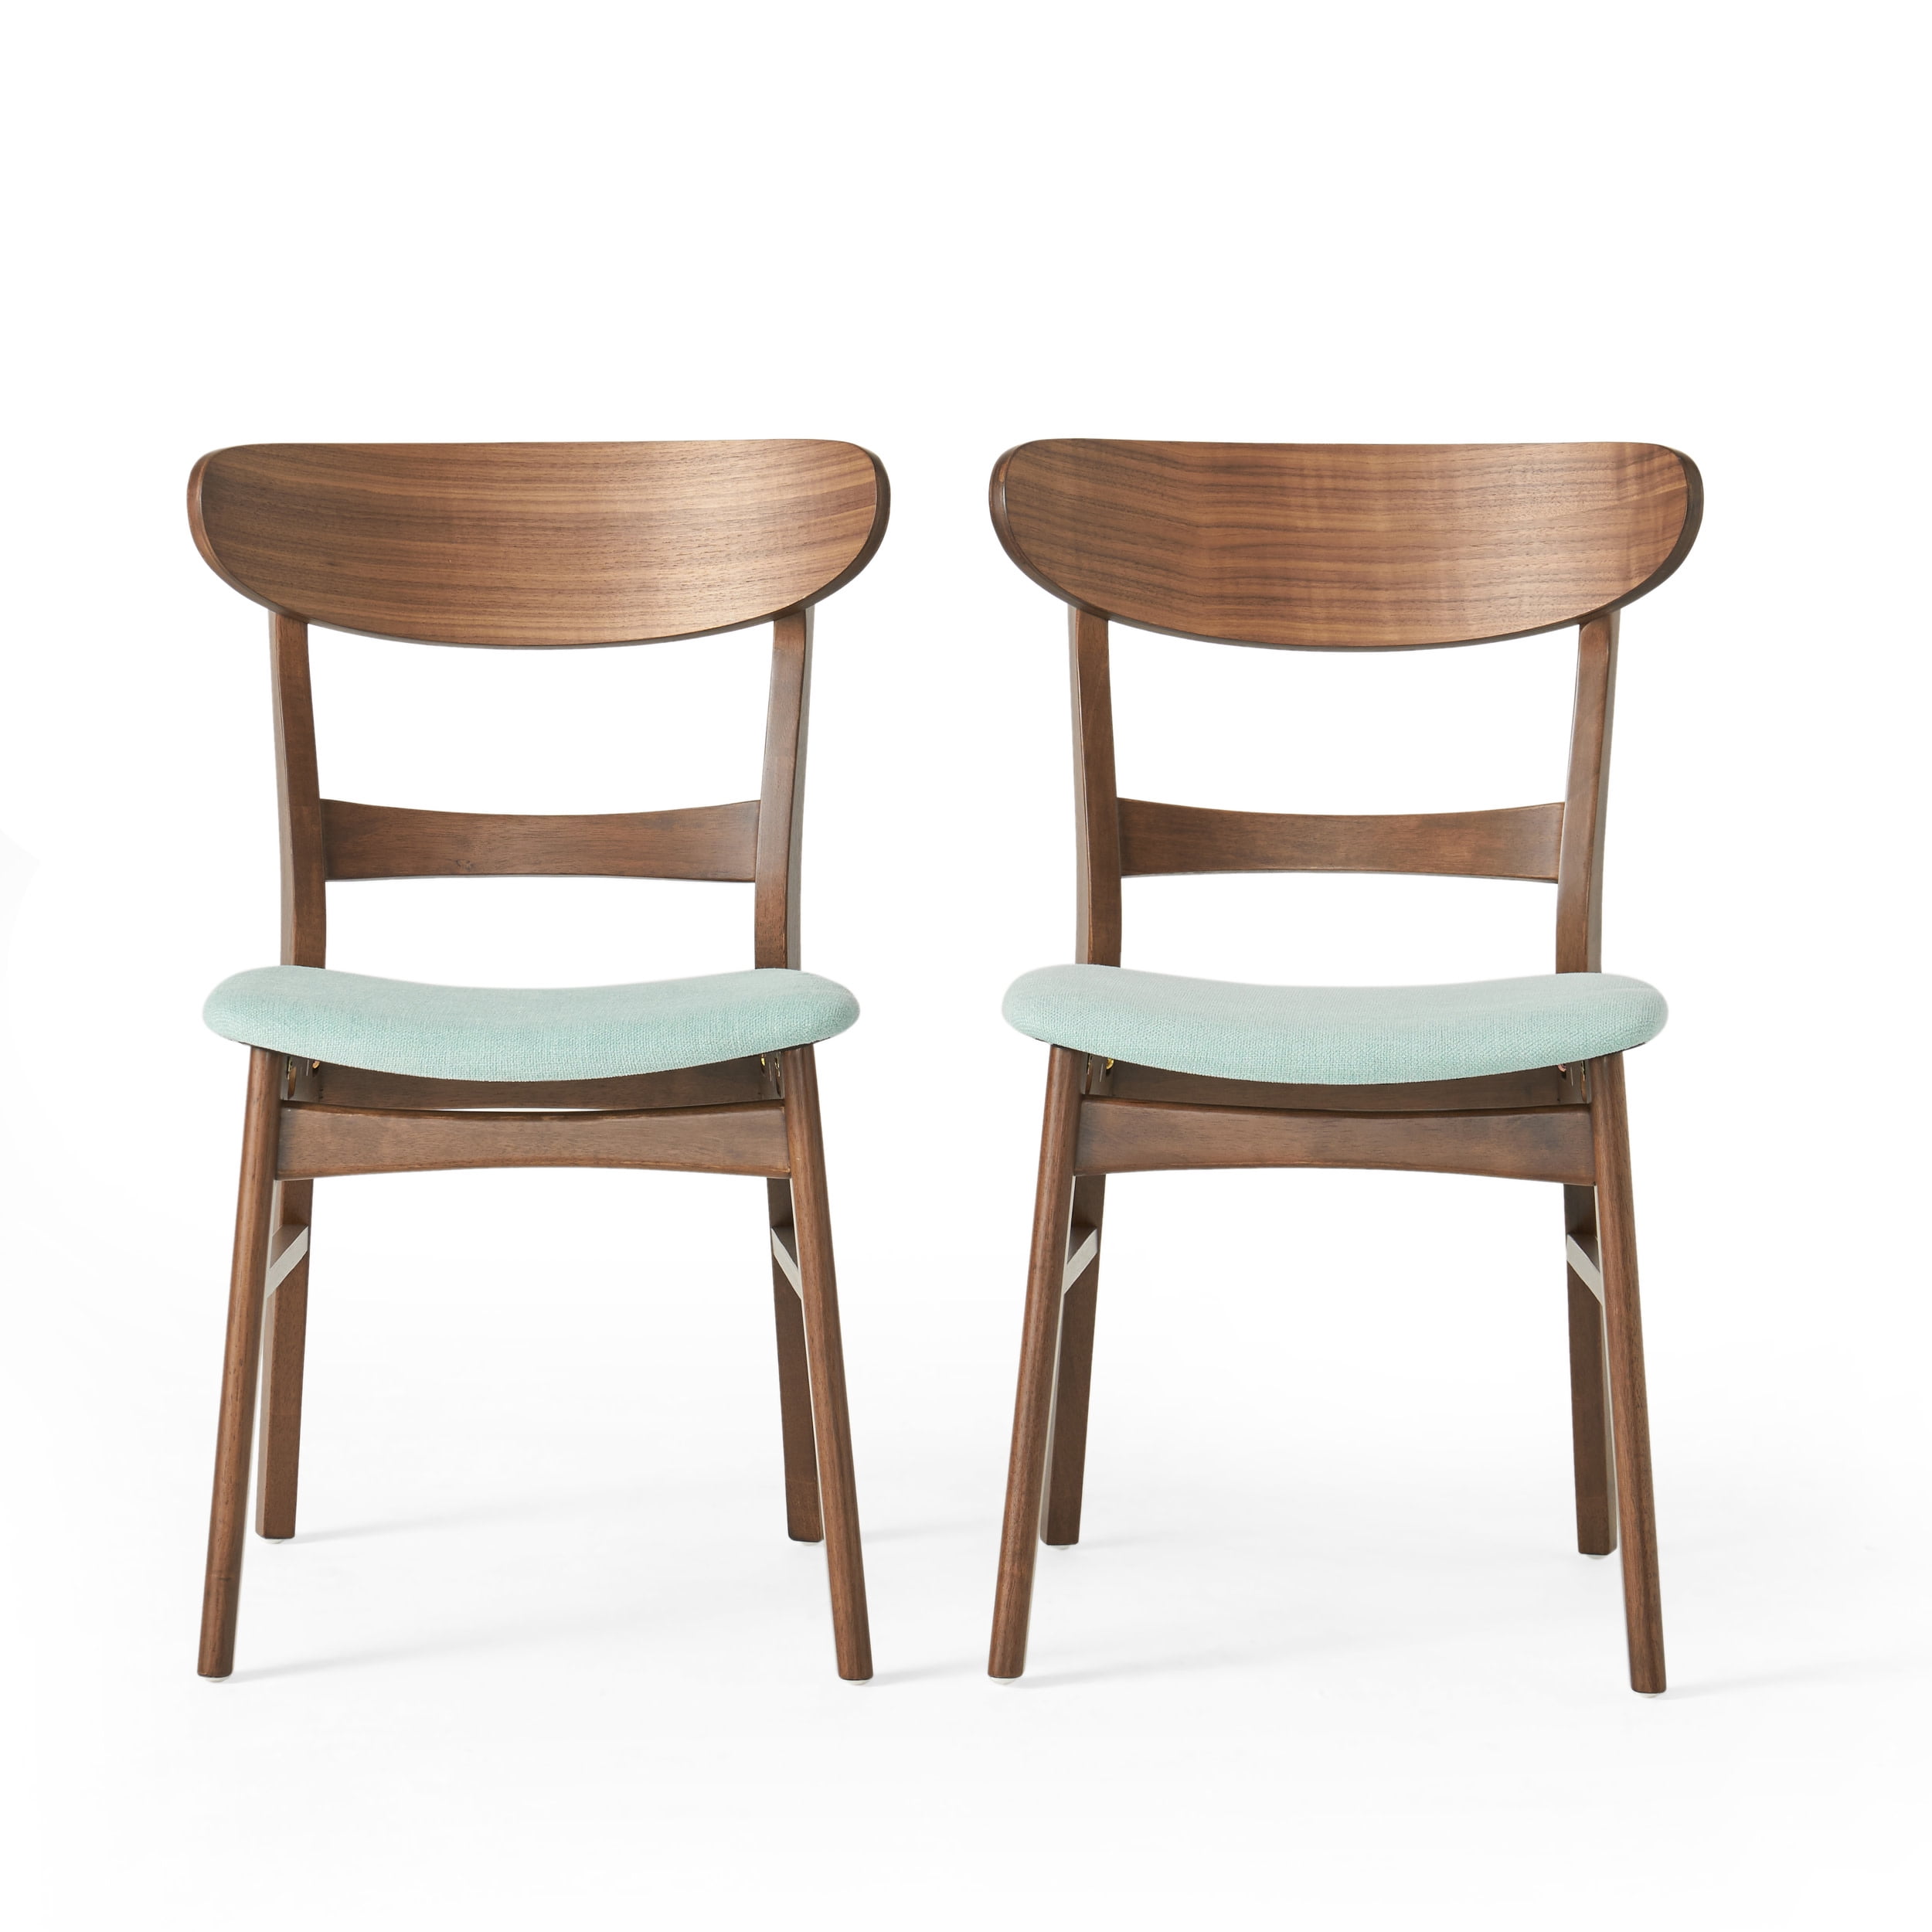  AQG Dining Chairs Set of 2 Mid Century Modern Dining